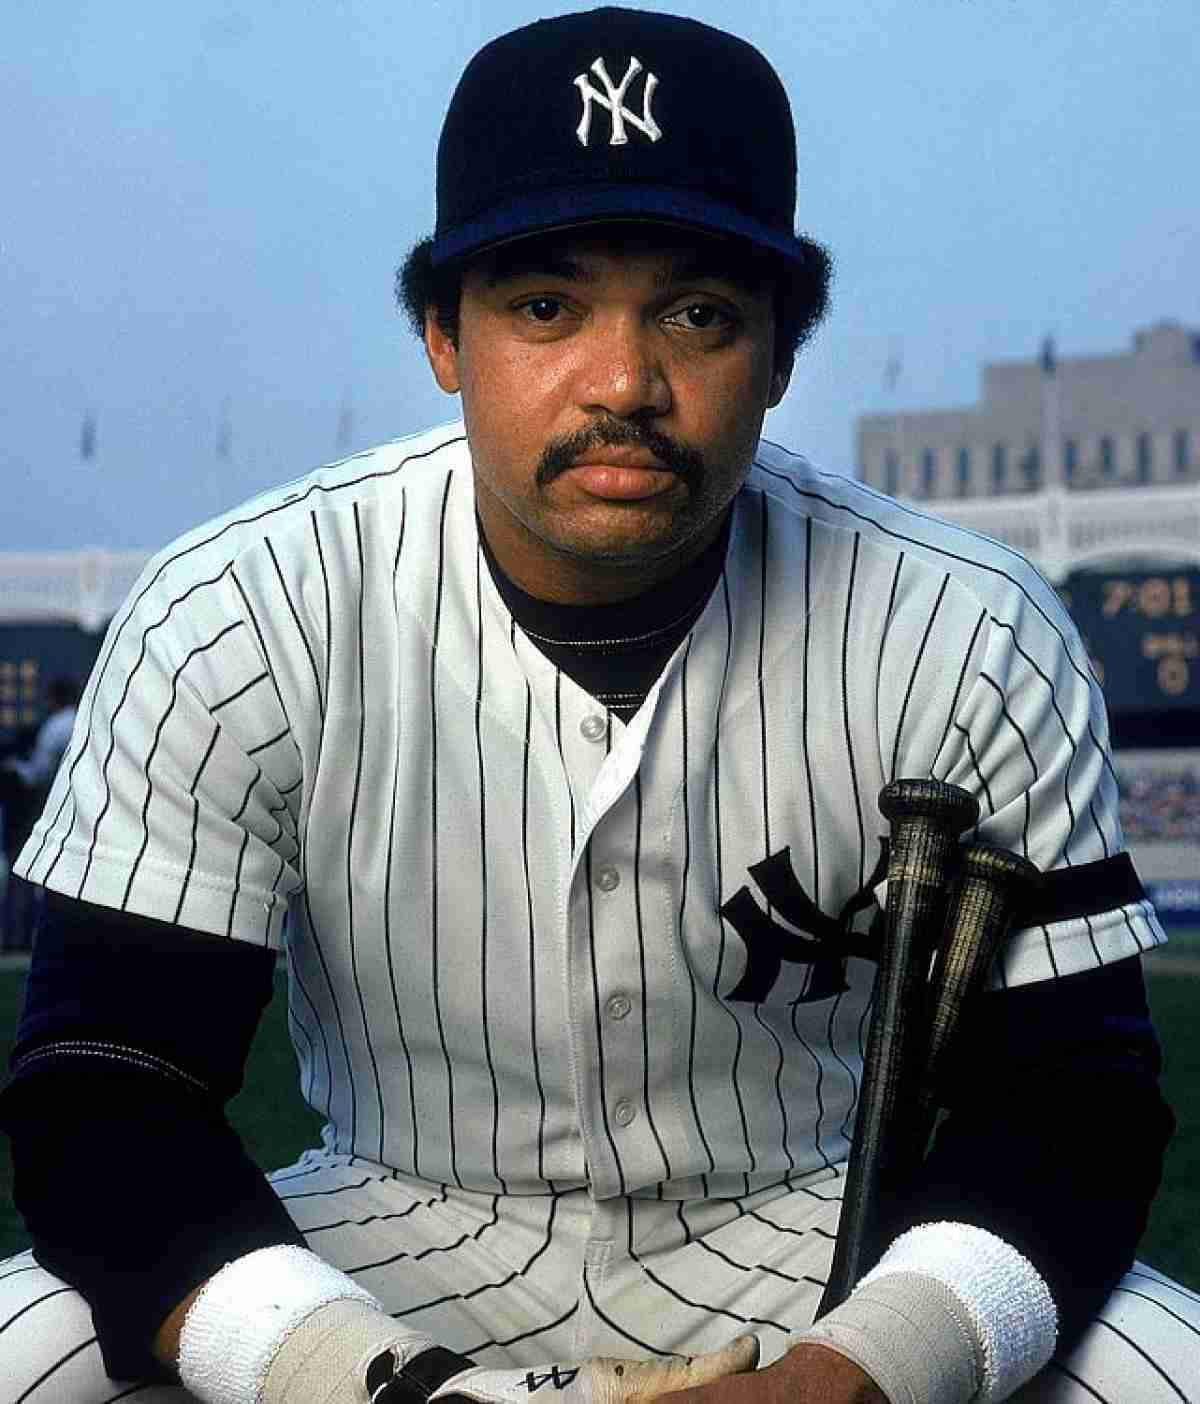 Not in Hall of Fame - 46. Reggie Jackson